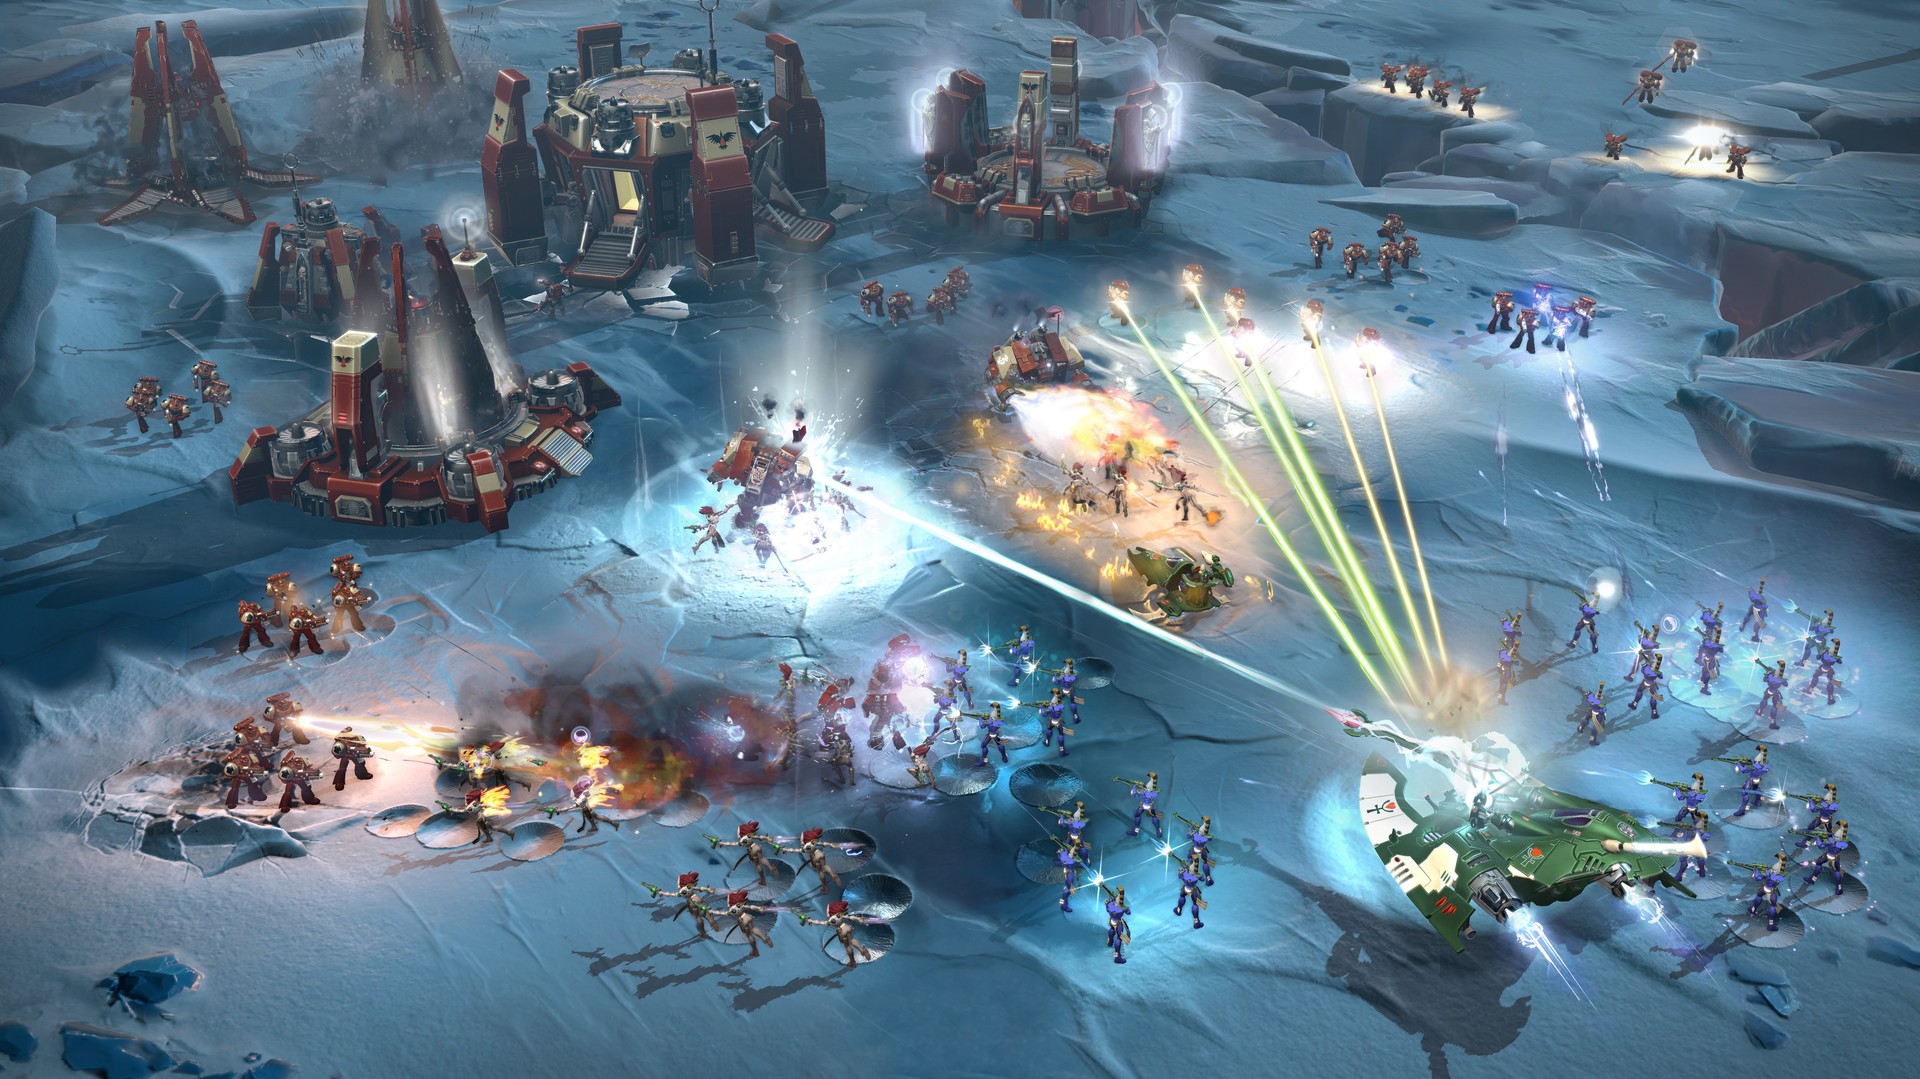 dawn of war 3 wallpaper,action adventure game,strategy video game,pc game,games,screenshot